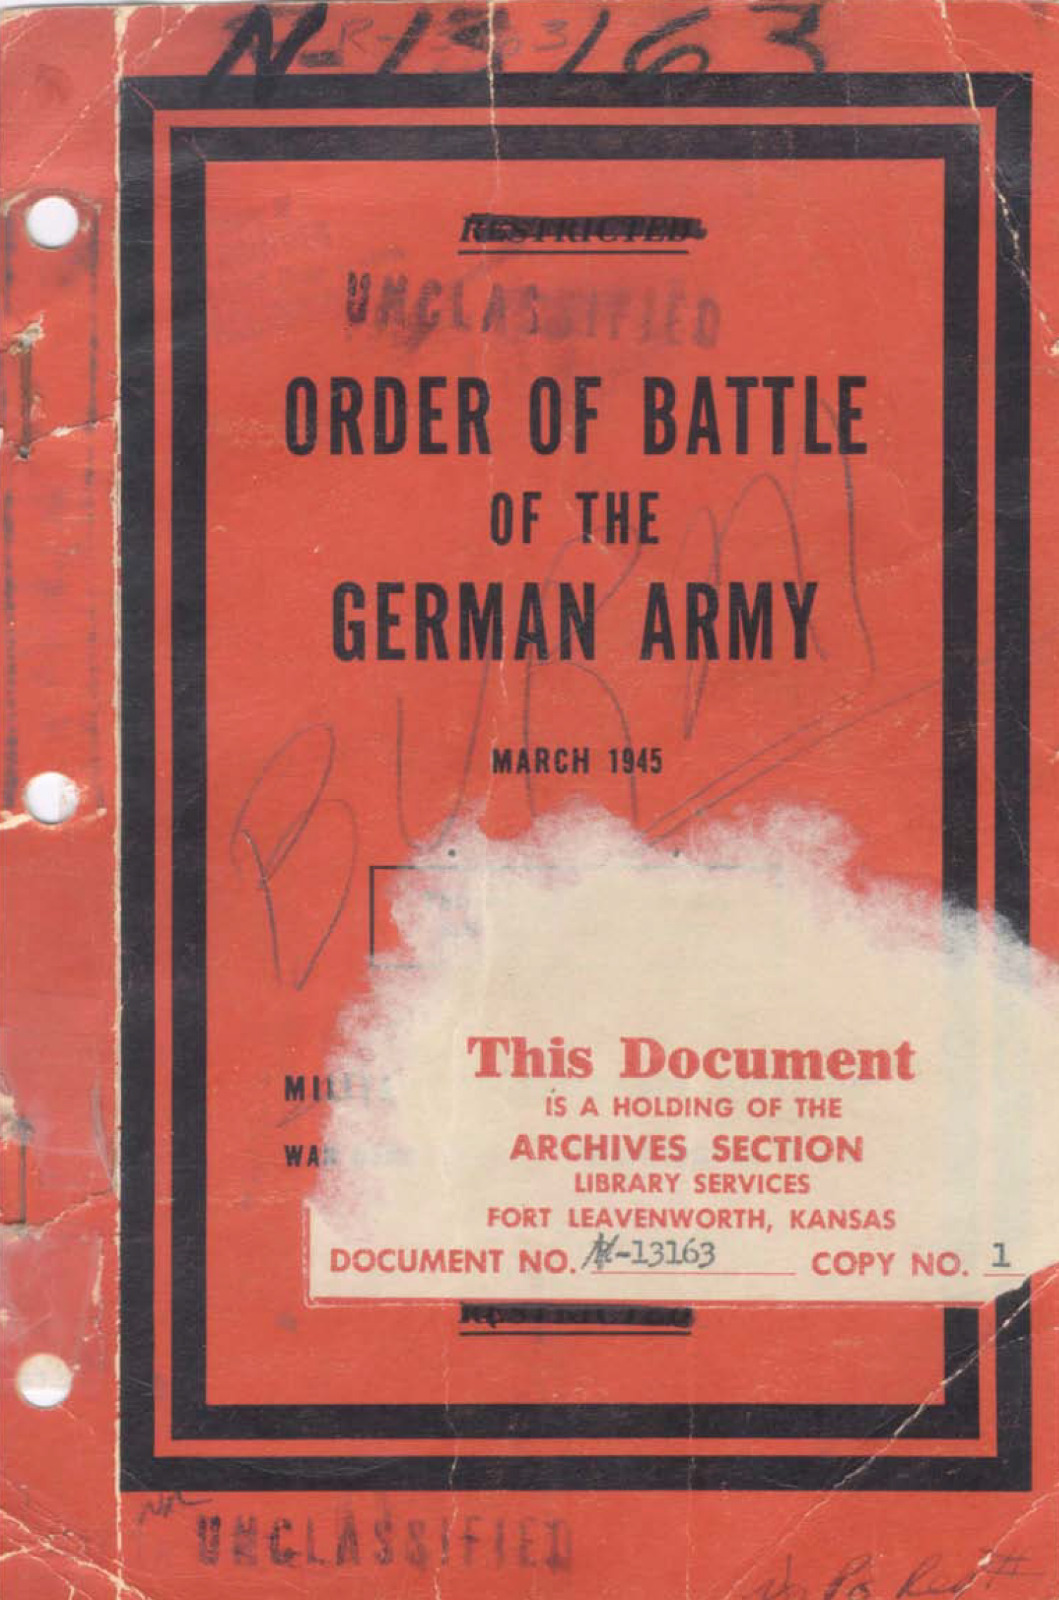 680 Page War Department March 1945 Order Of Battle Of The German Army on Data CD